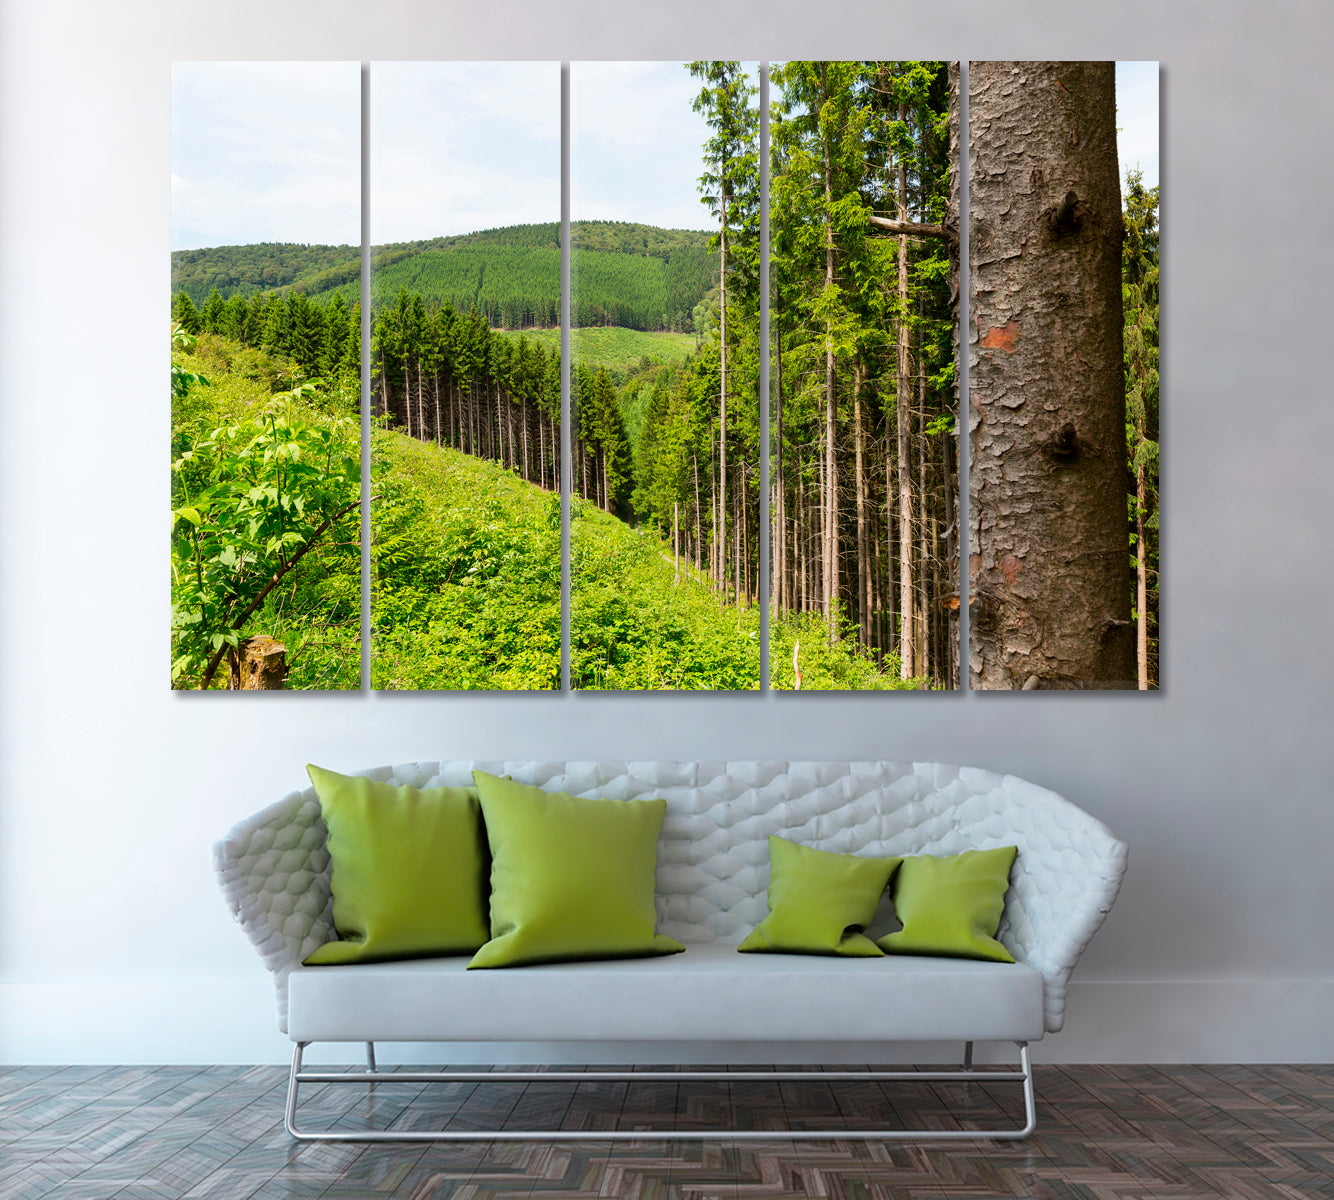 Sauerland Forest Germany Canvas Print ArtLexy 5 Panels 36"x24" inches 